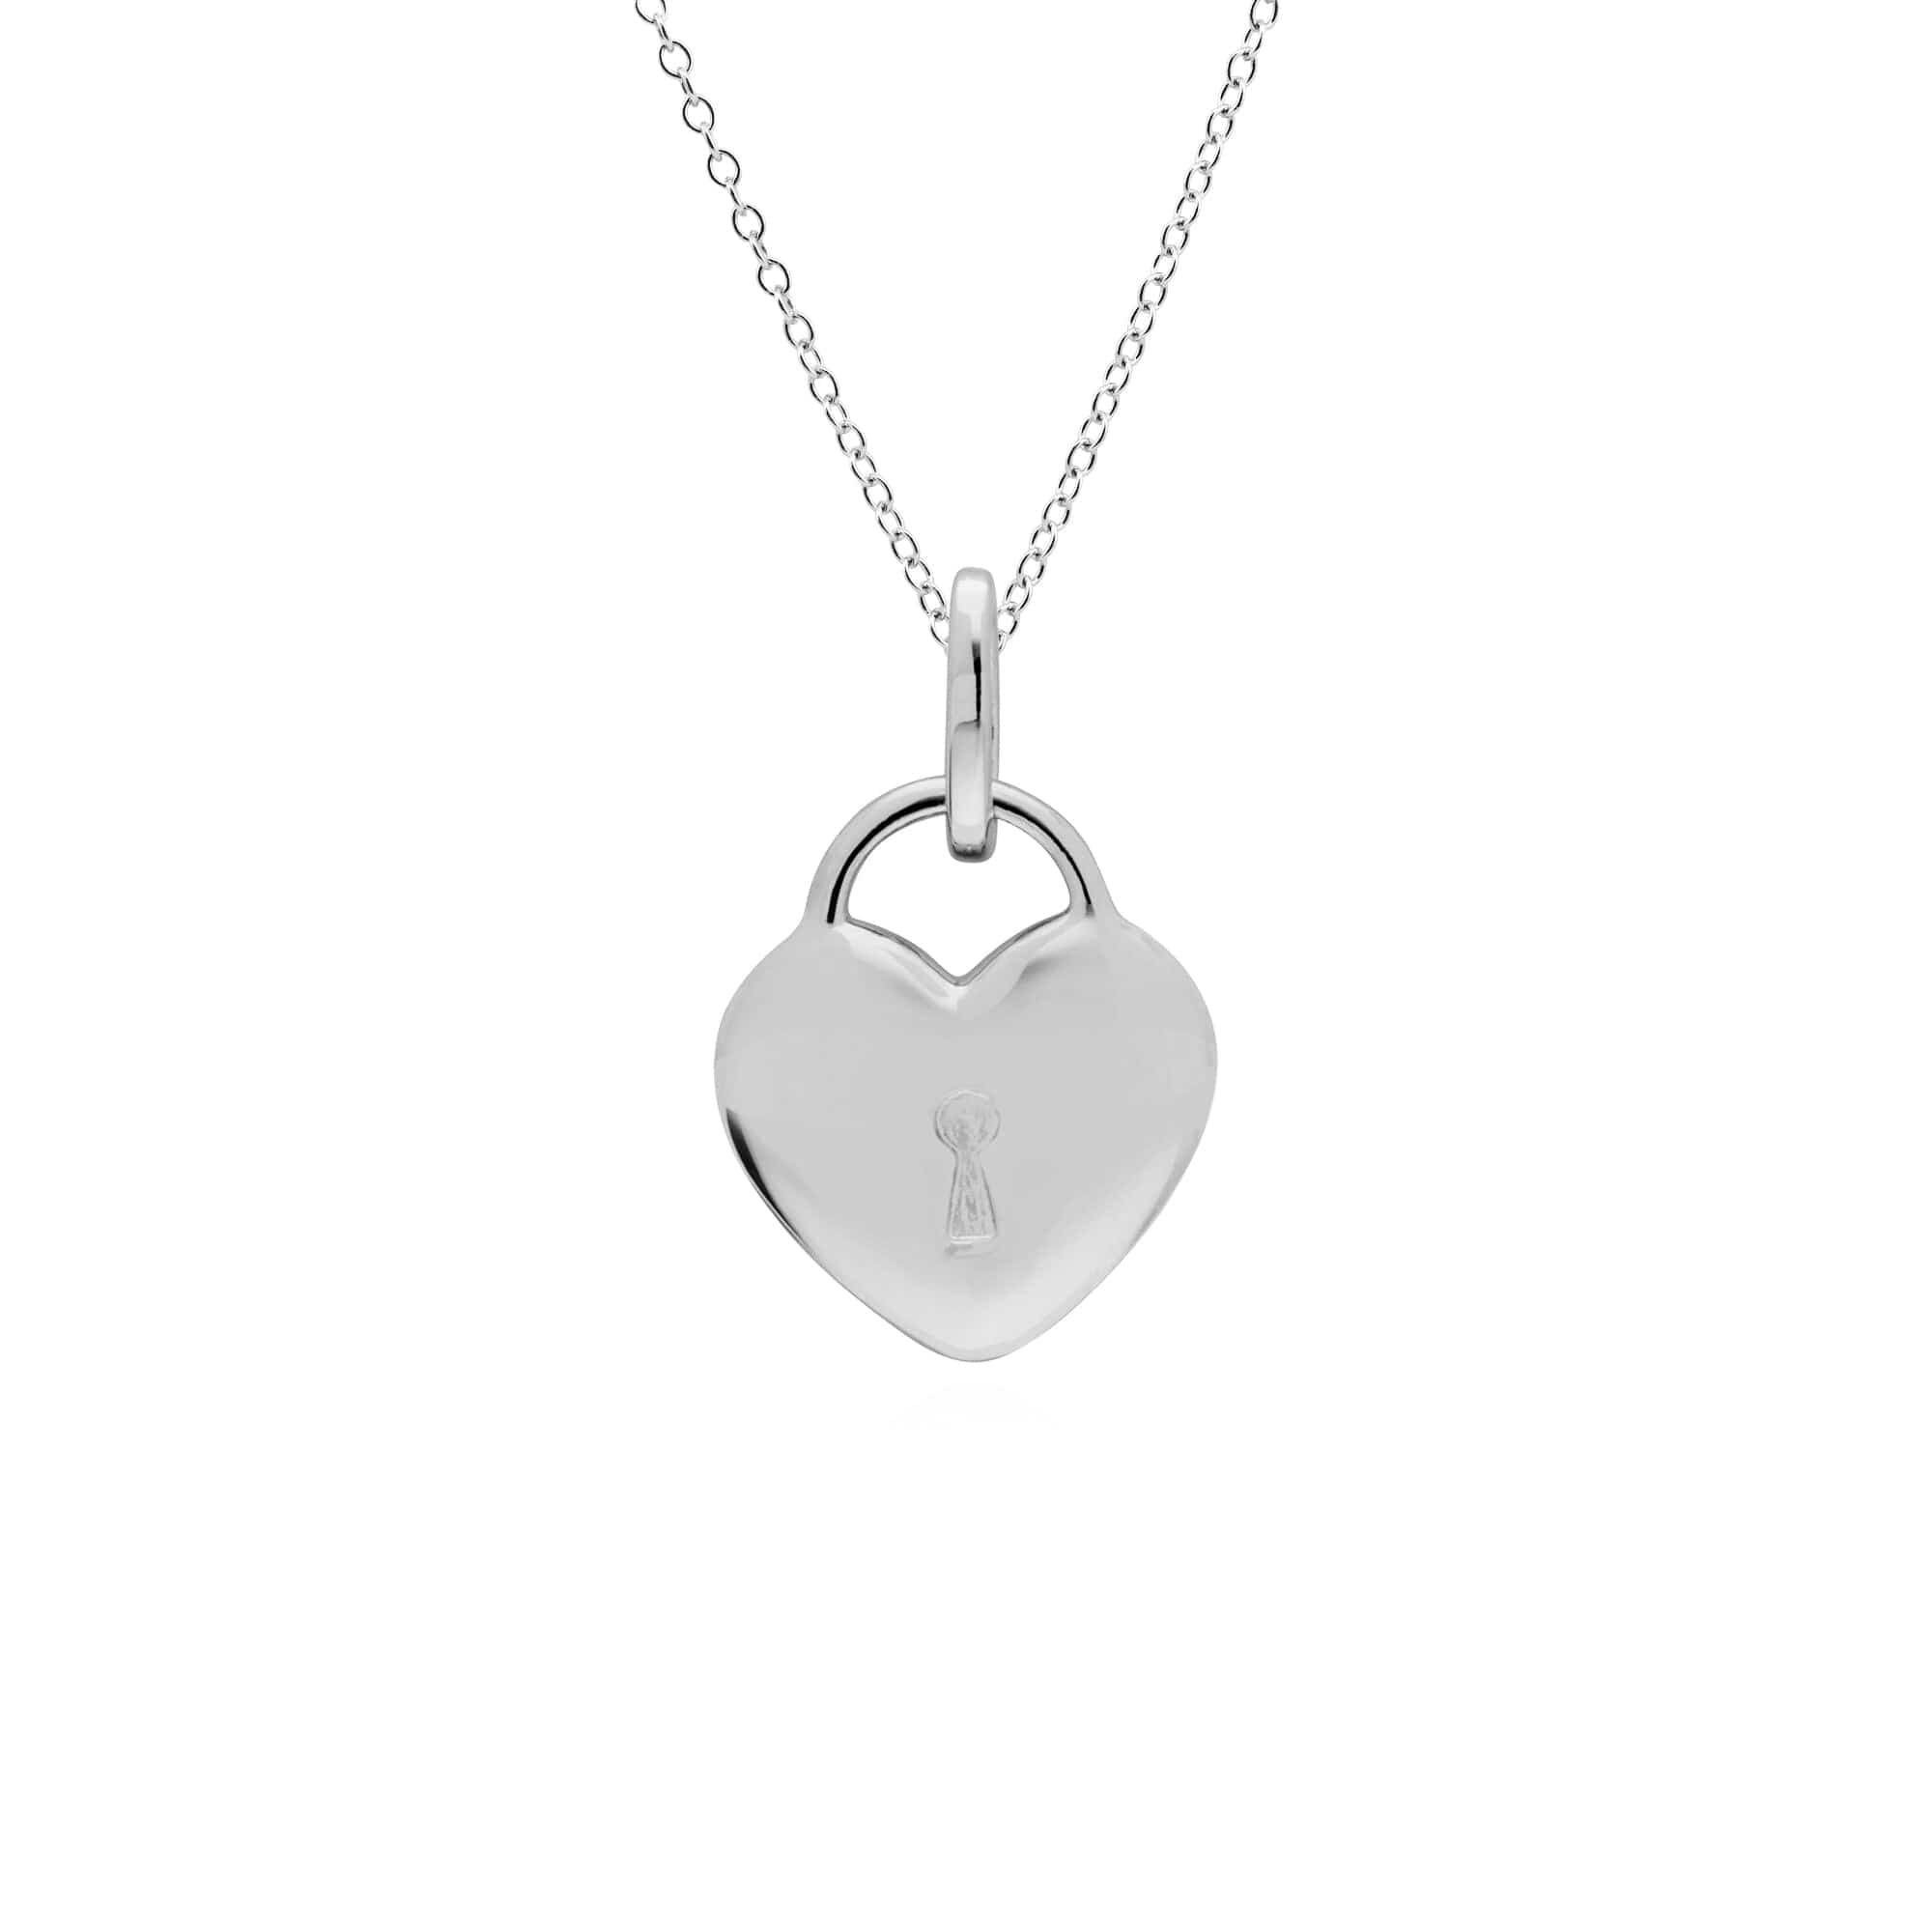 270P027201925-270P027001925 Classic Heart Lock Pendant & Pearl Key Charm in 925 Sterling Silver 3